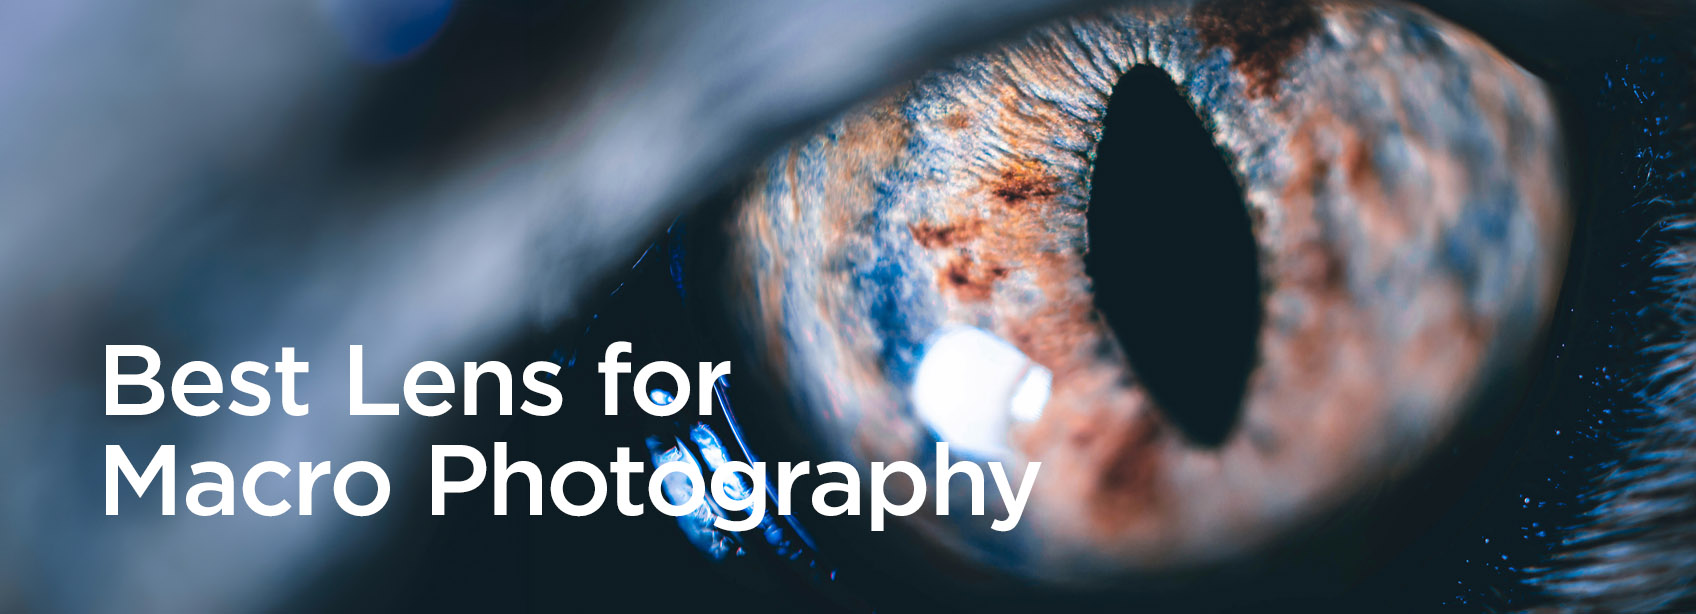 best lens for macro photography